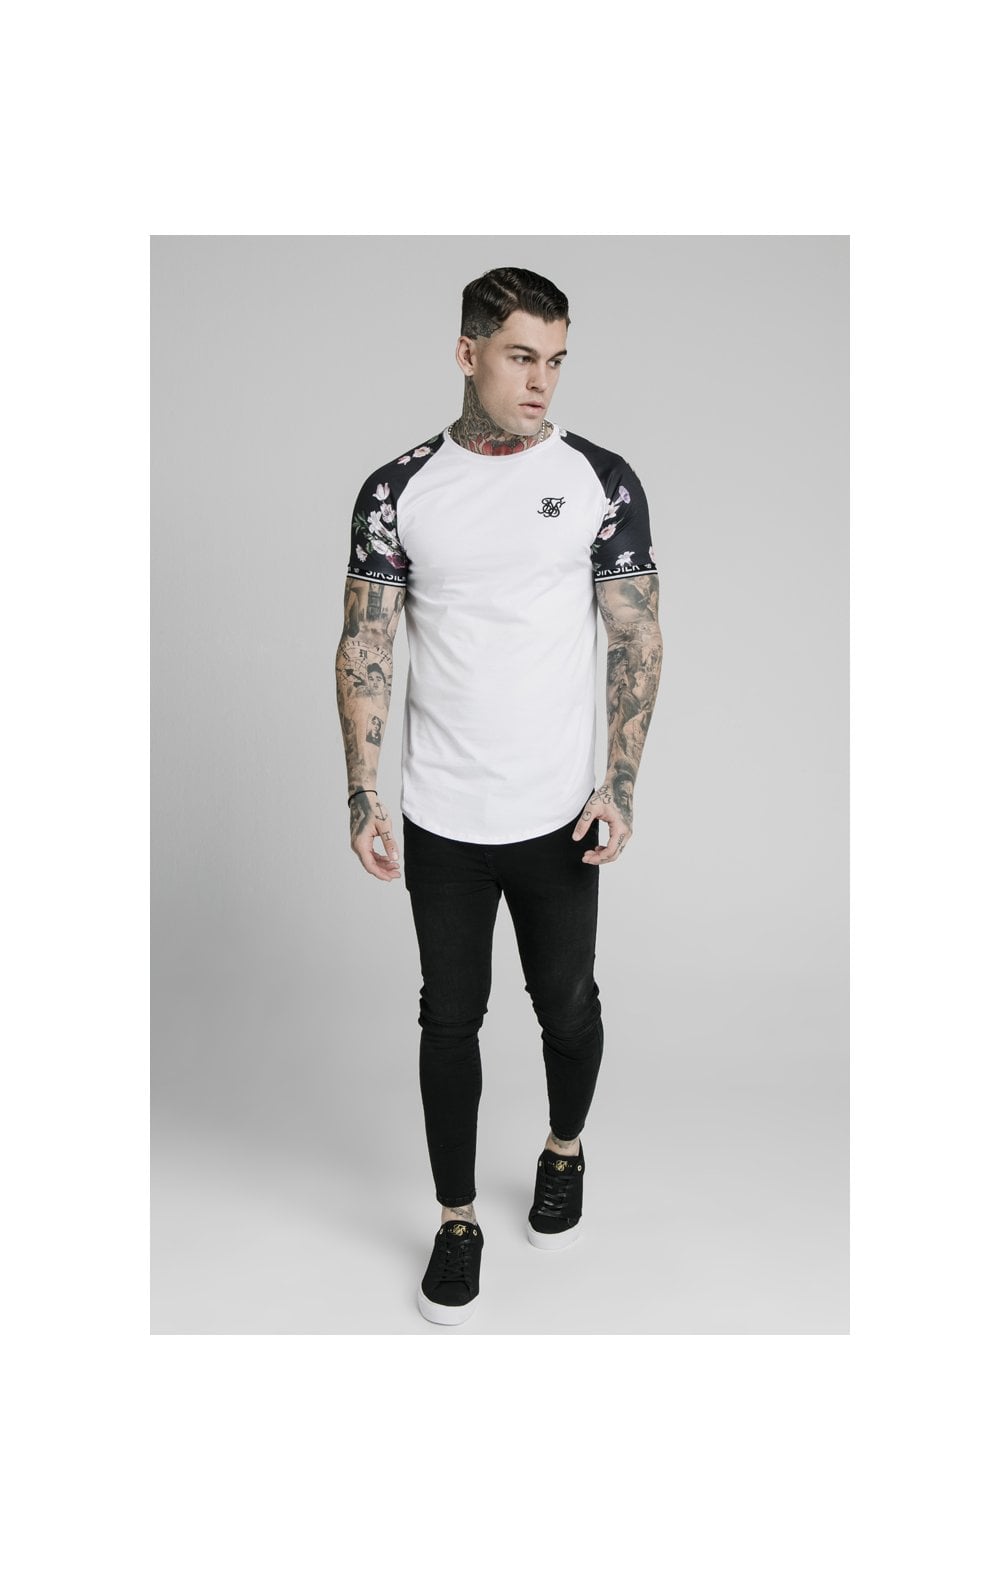 Load image into Gallery viewer, SikSilk S/S Prestige Floral Inset Tech Tee - White (2)